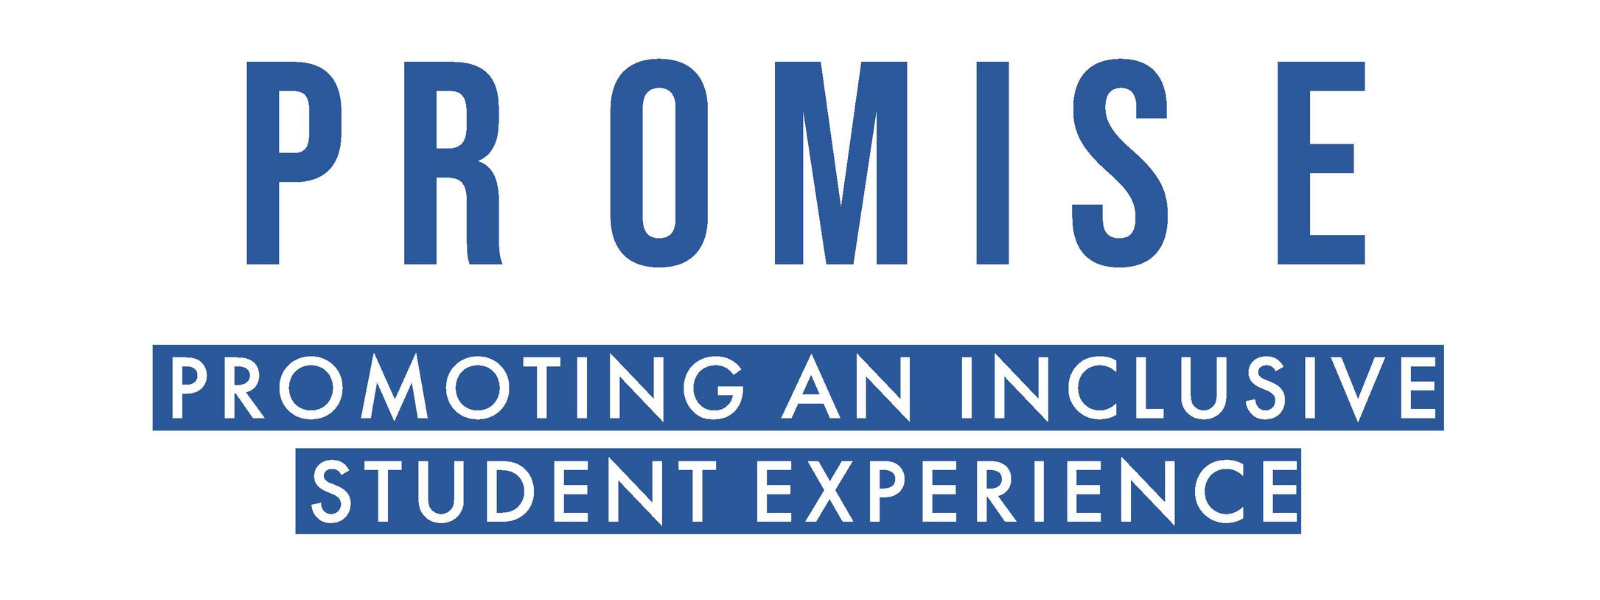 Banner saying Promise: Promoting An Inclusive Student Experience